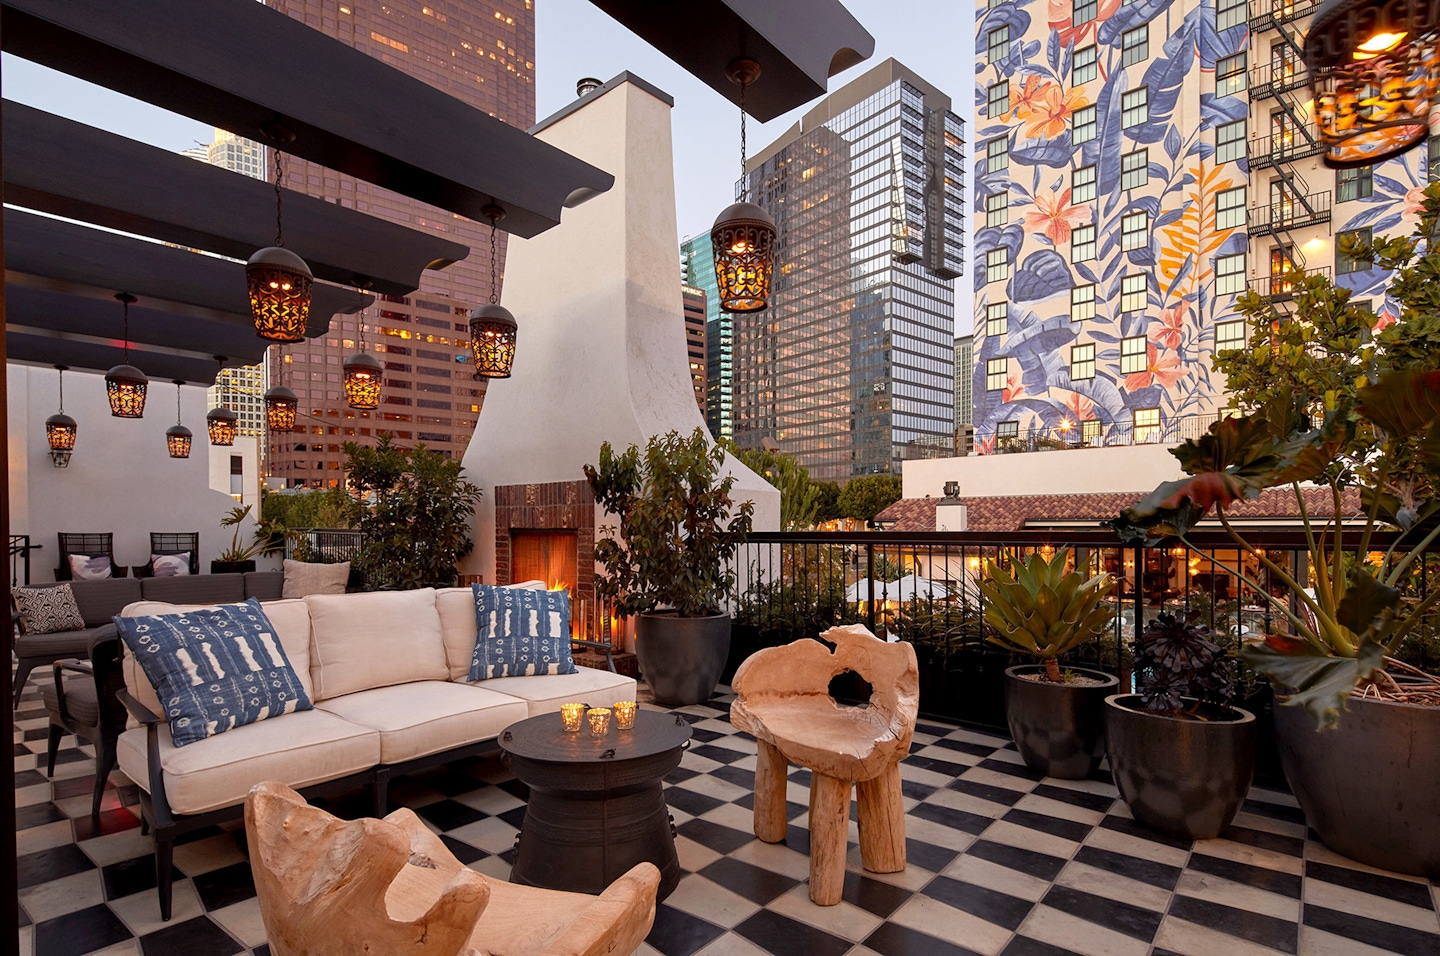 Indoor/outdoor rooftop lounge space, a gathering space at Hotel Figueroa, located in downtown Los Angeles | Hotel Figueroa